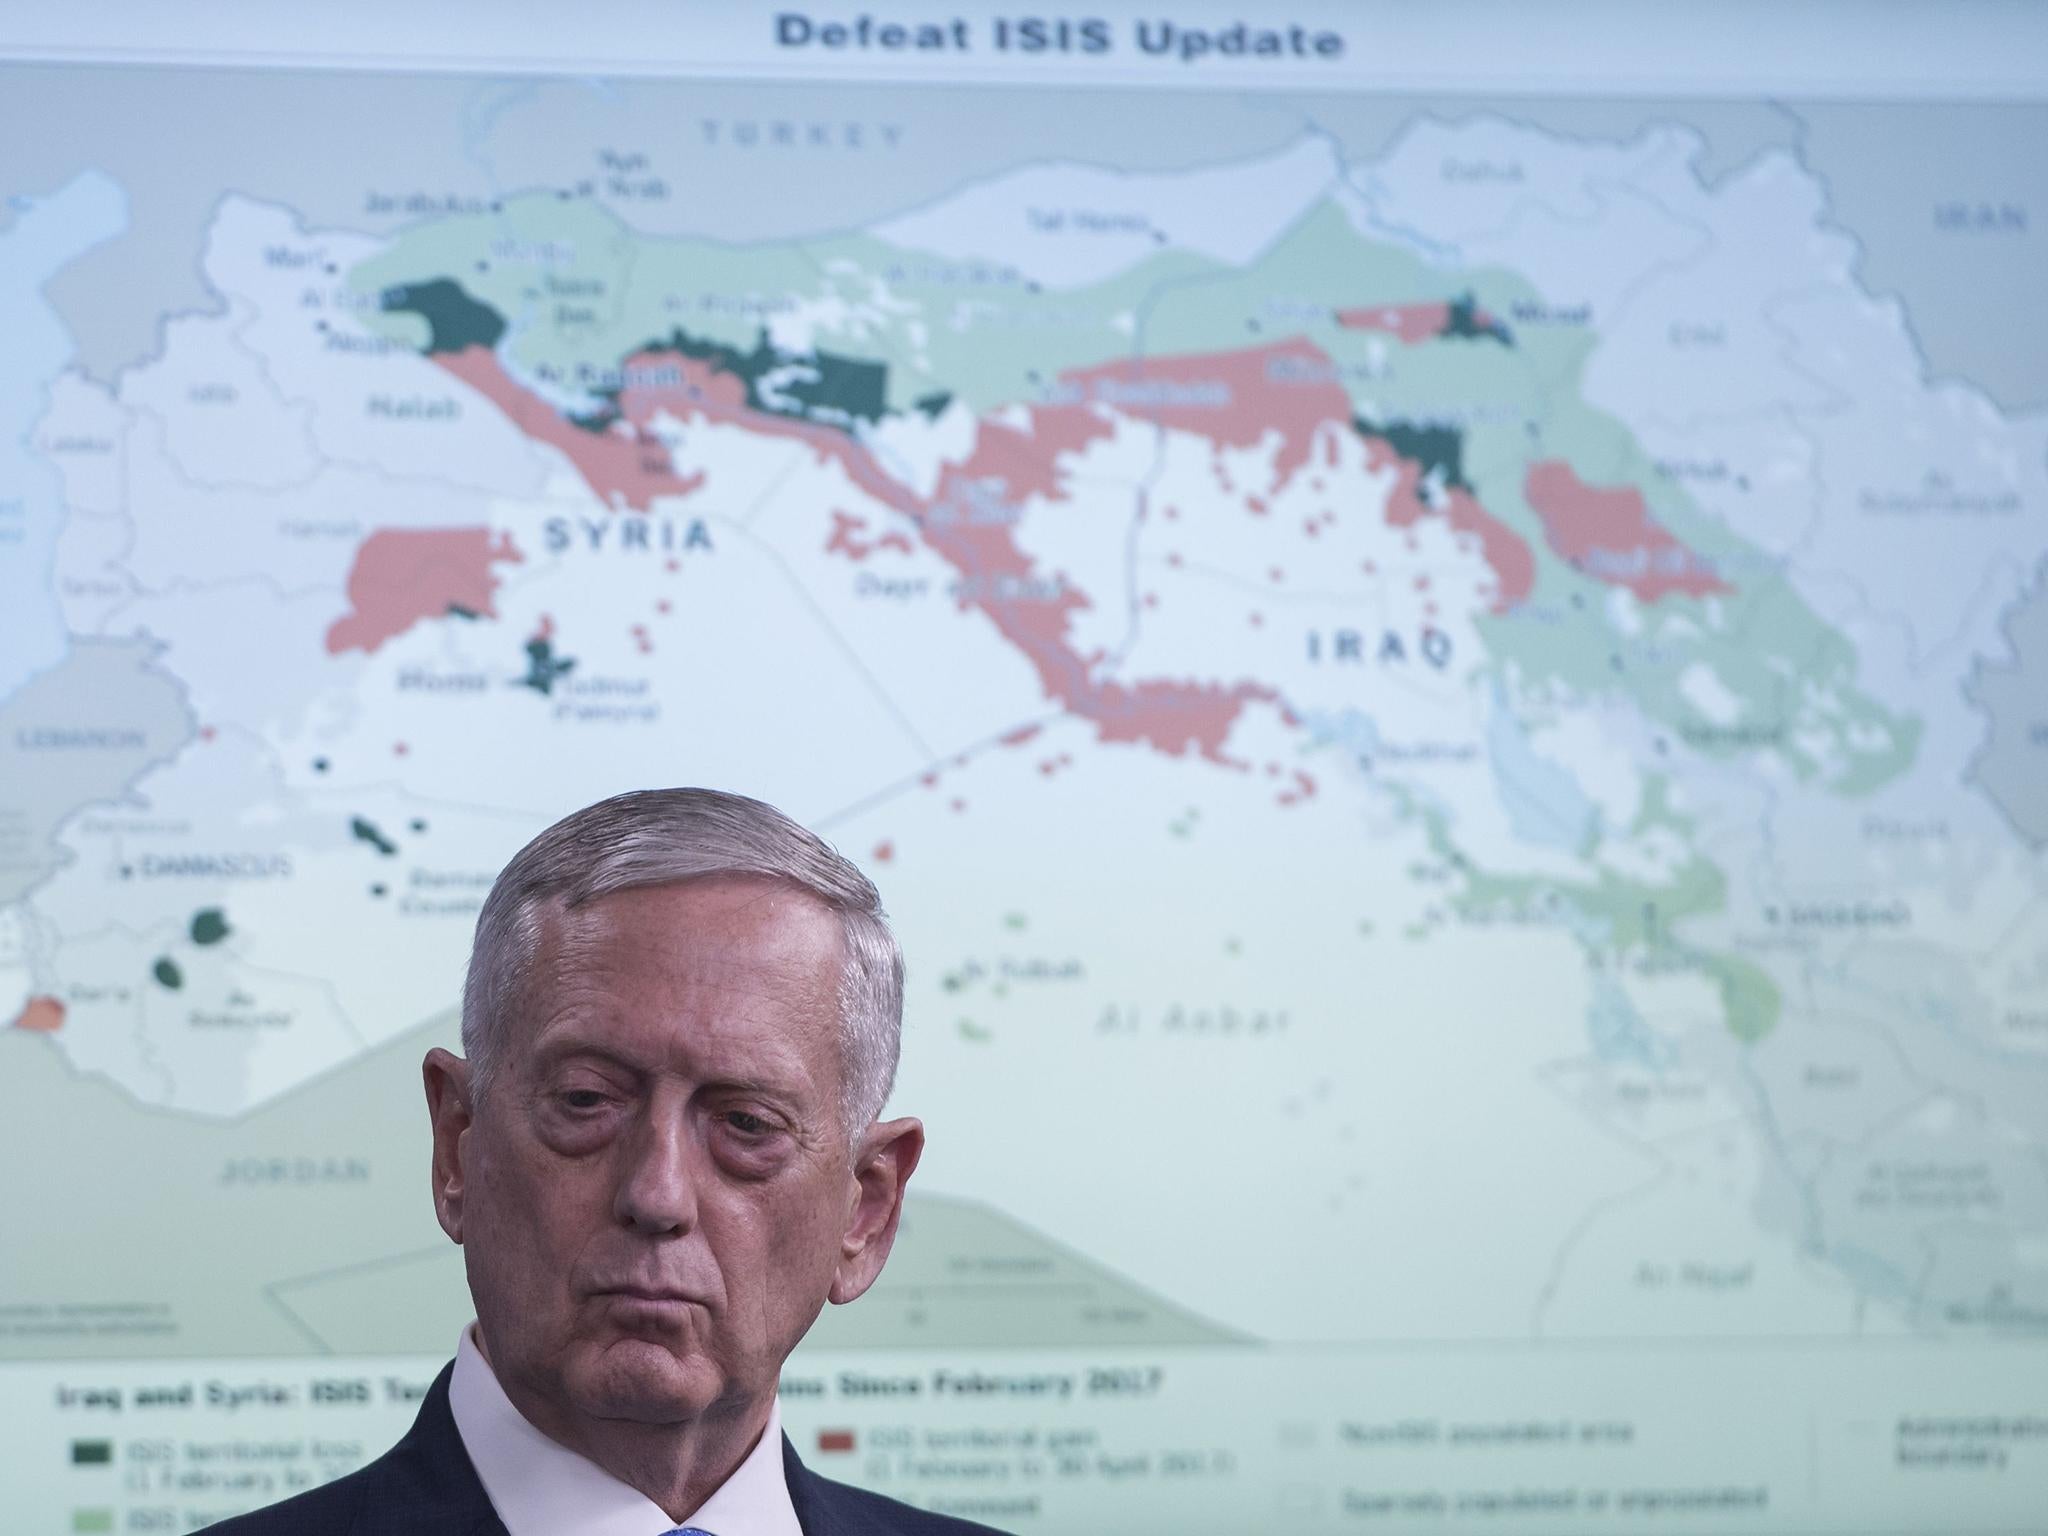 The battle against Isis has shifted from attrition to 'annihilation' tactics, US Defence Secretary General James Mattis said